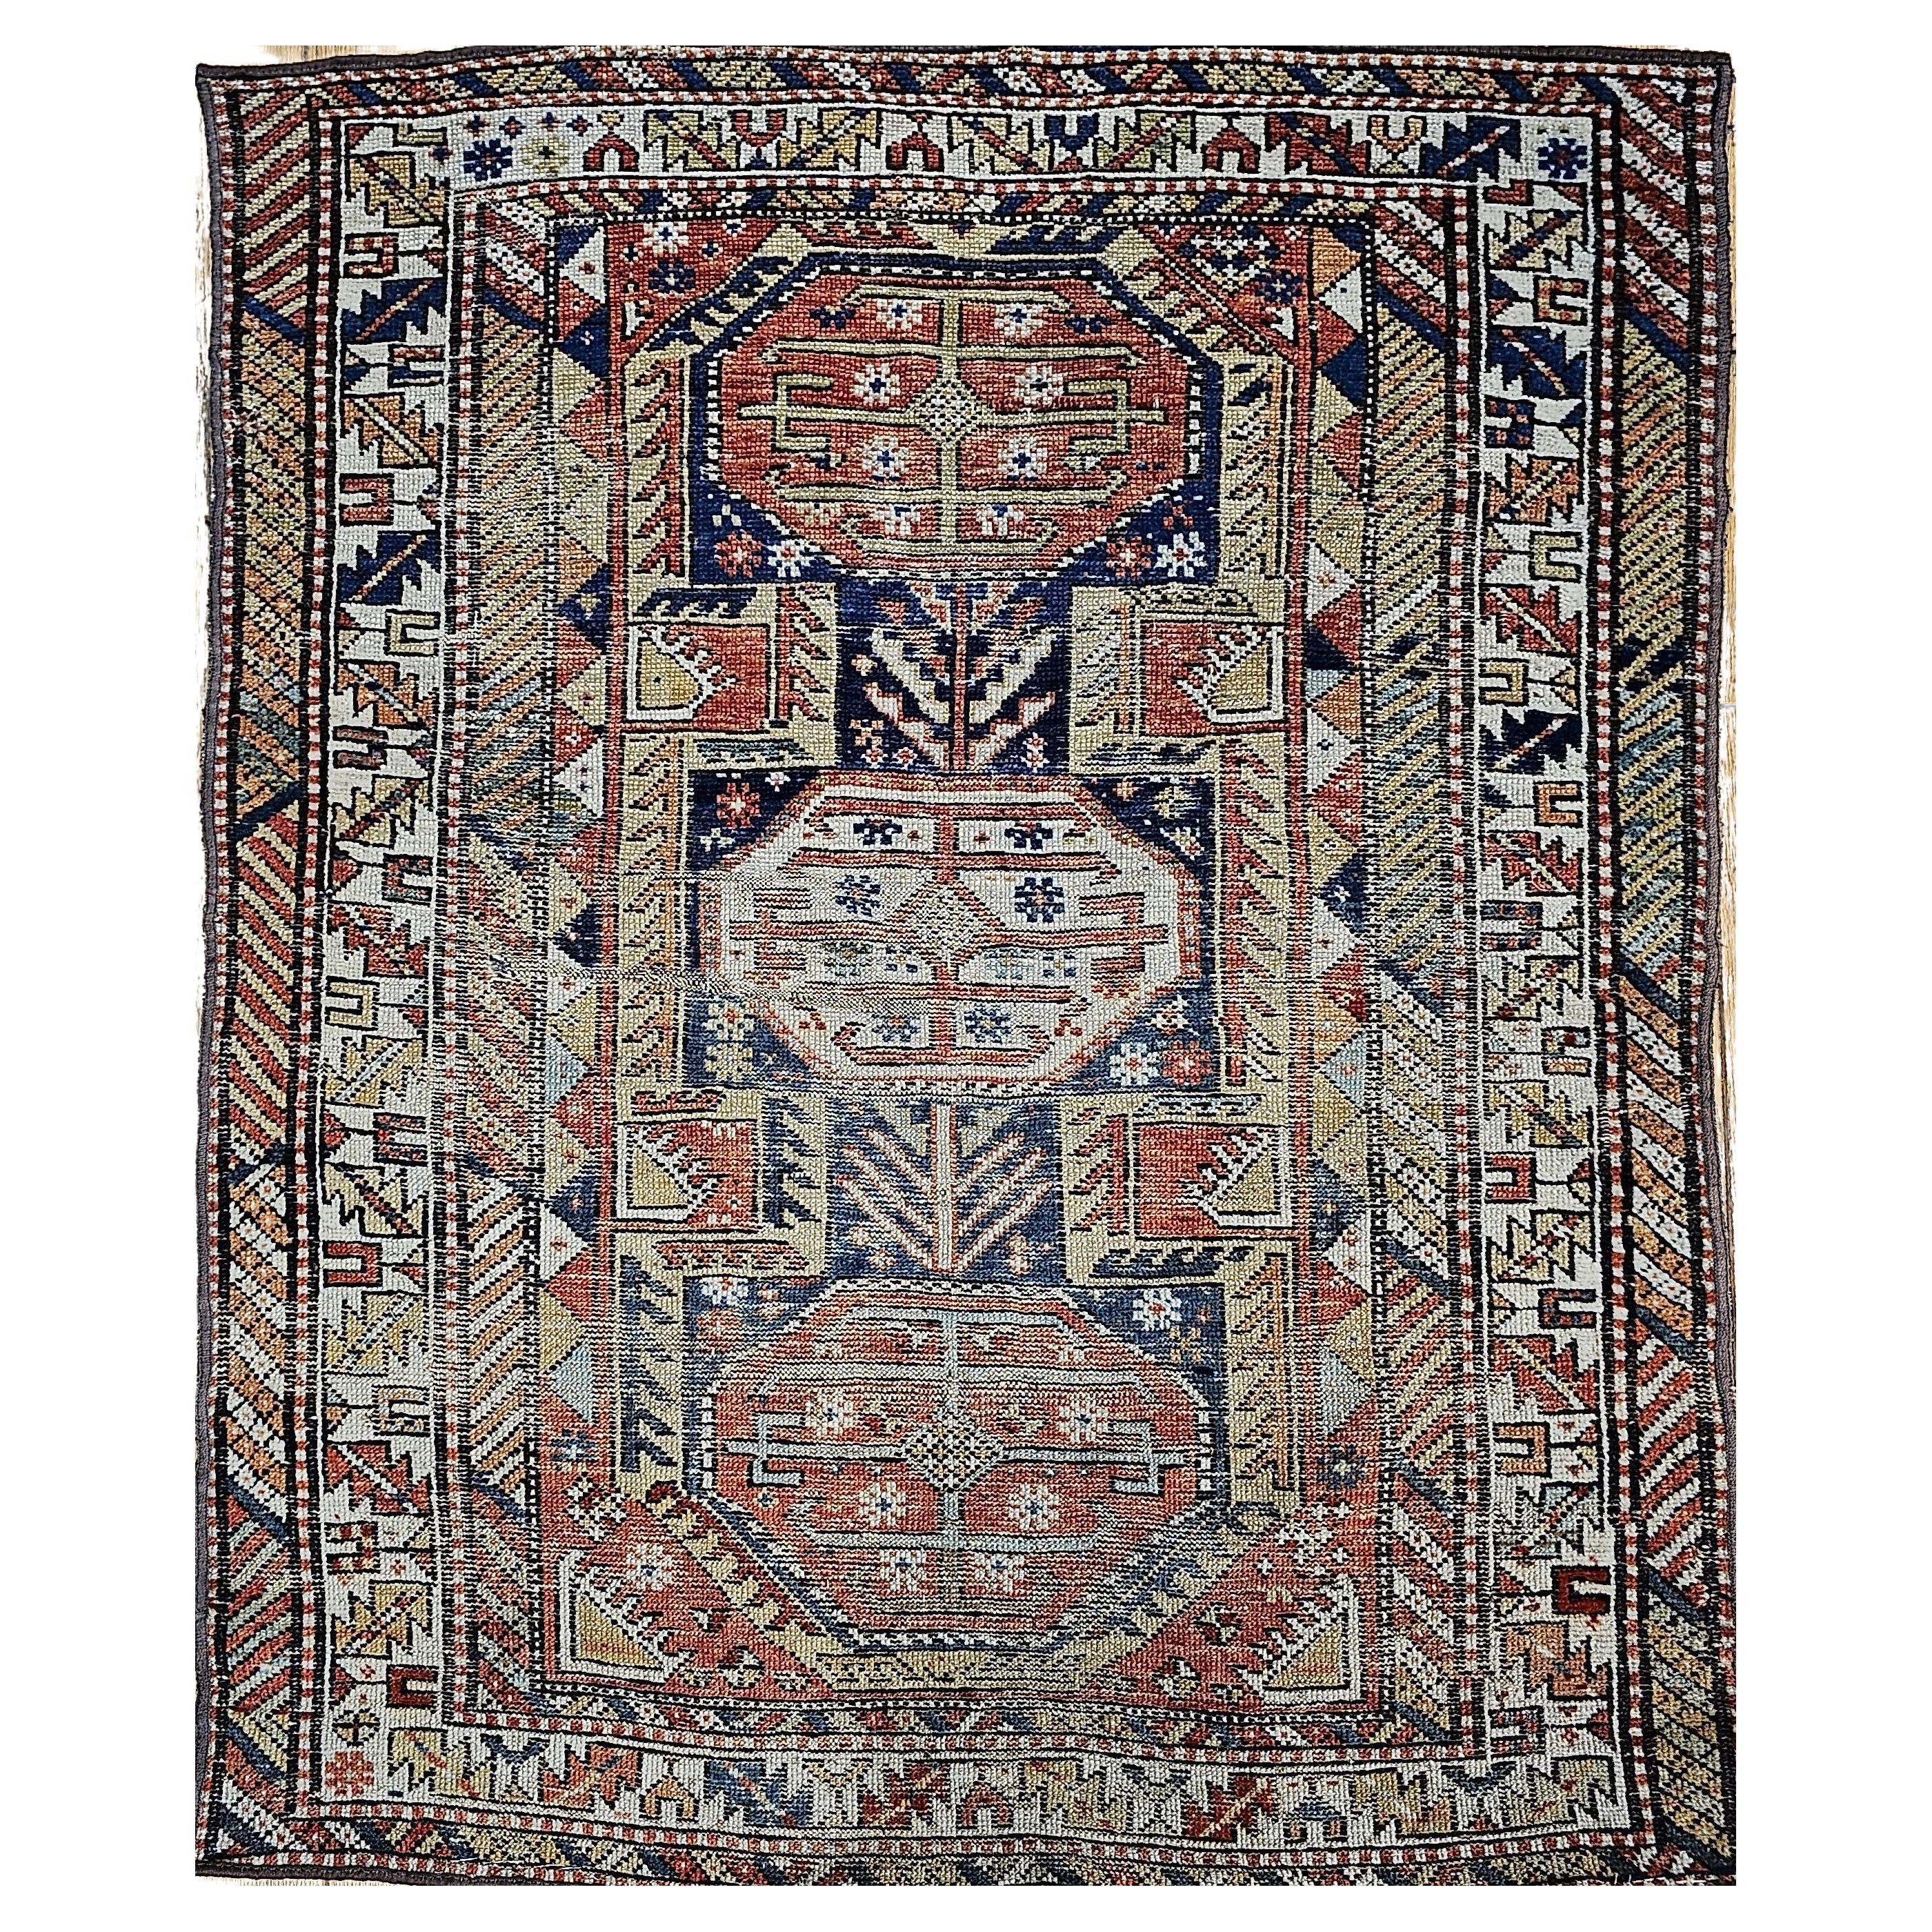 19th Century Caucasian Shirvan Area Rug in Medallion Pattern in Navy Blue, Ivory